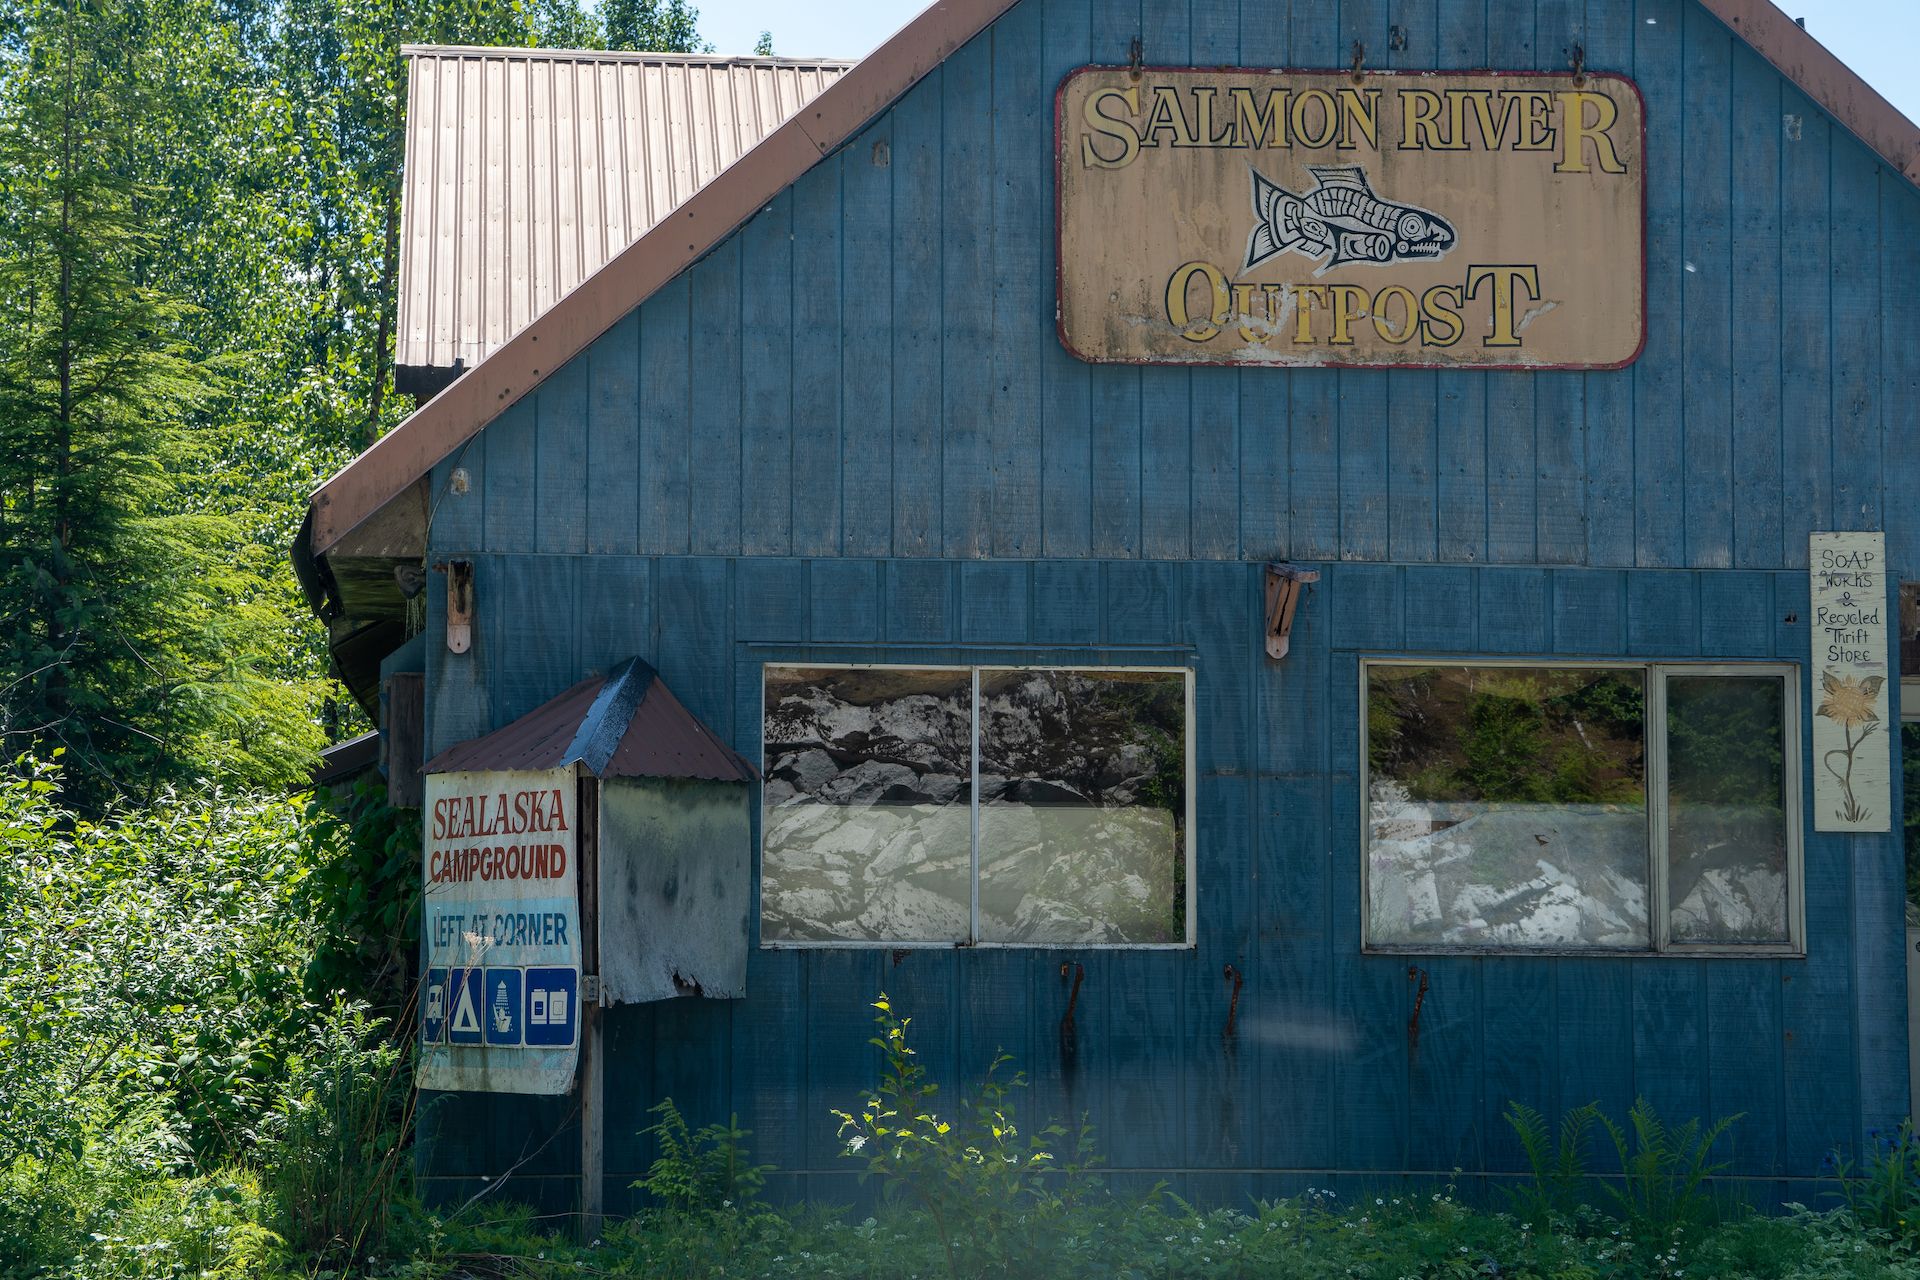 The small community of Hyder, AK seems to fall in disrepair